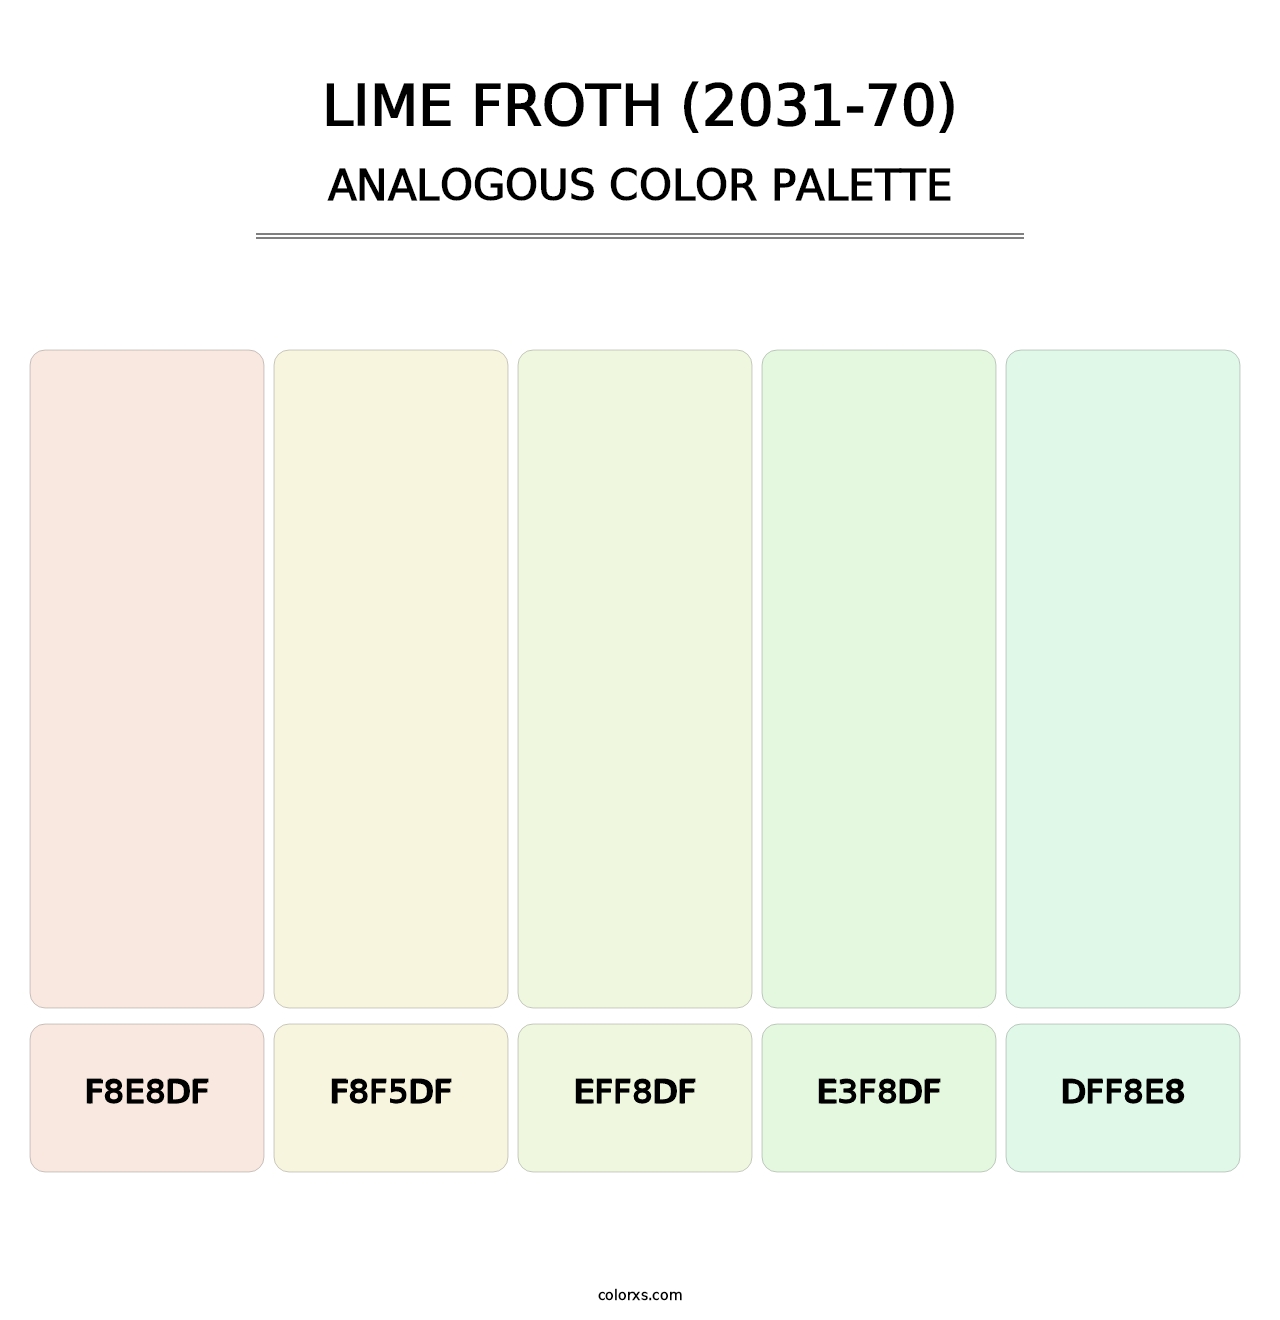 Lime Froth (2031-70) - Analogous Color Palette